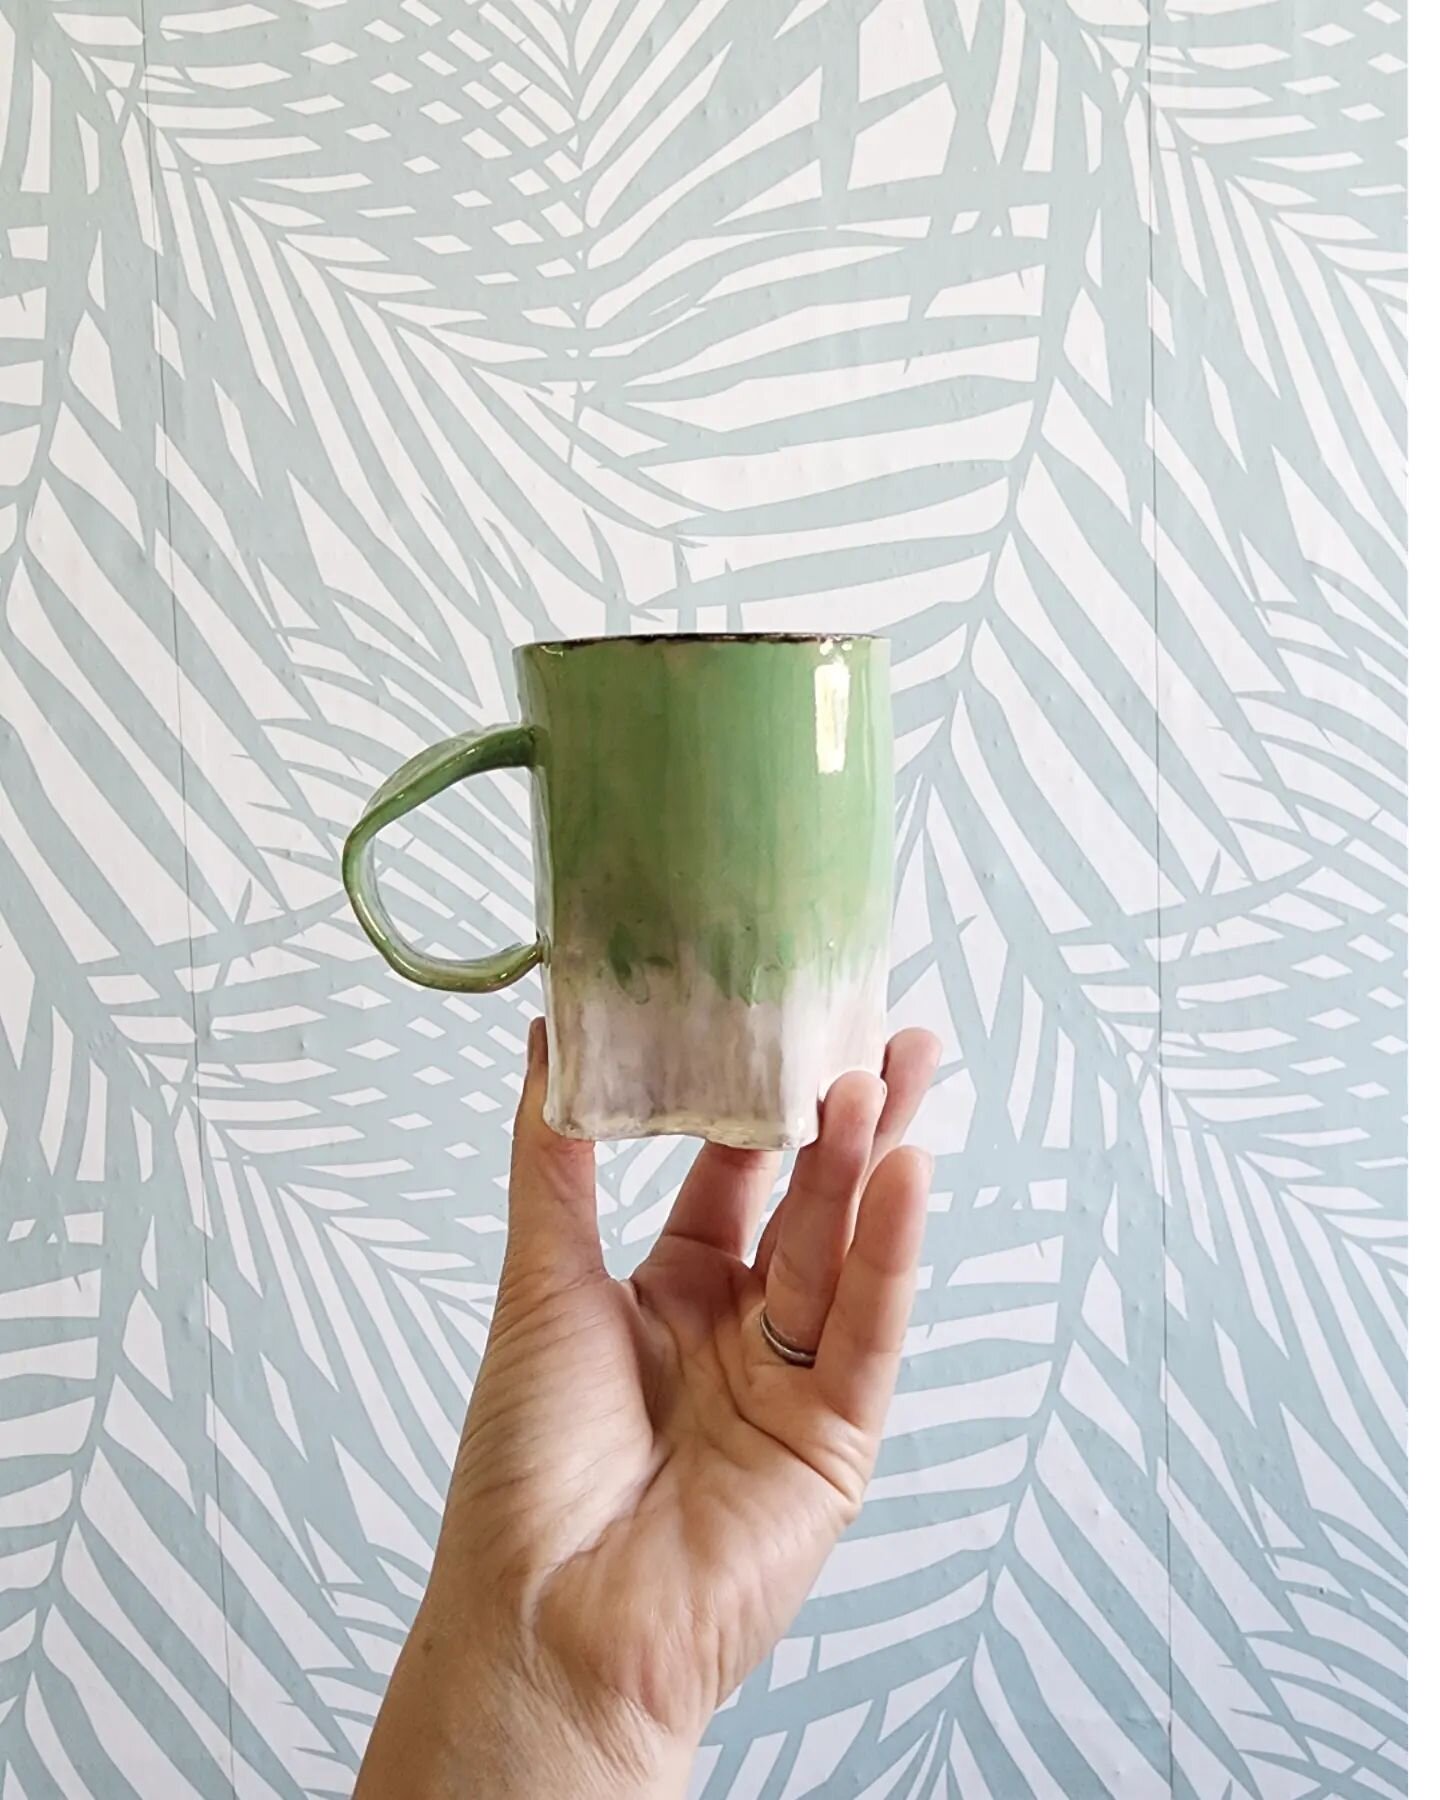 Sign up today for Mother's Day weekend classes! We still have some space available!
.
.
.
.
📷 student mug
.
.
.
#artstpete #artclasses #potteryclasses #potteryclass #potterystudio #stpetepottery #tampabay #ilovetheburg #atelierstpete #mothersdaygift